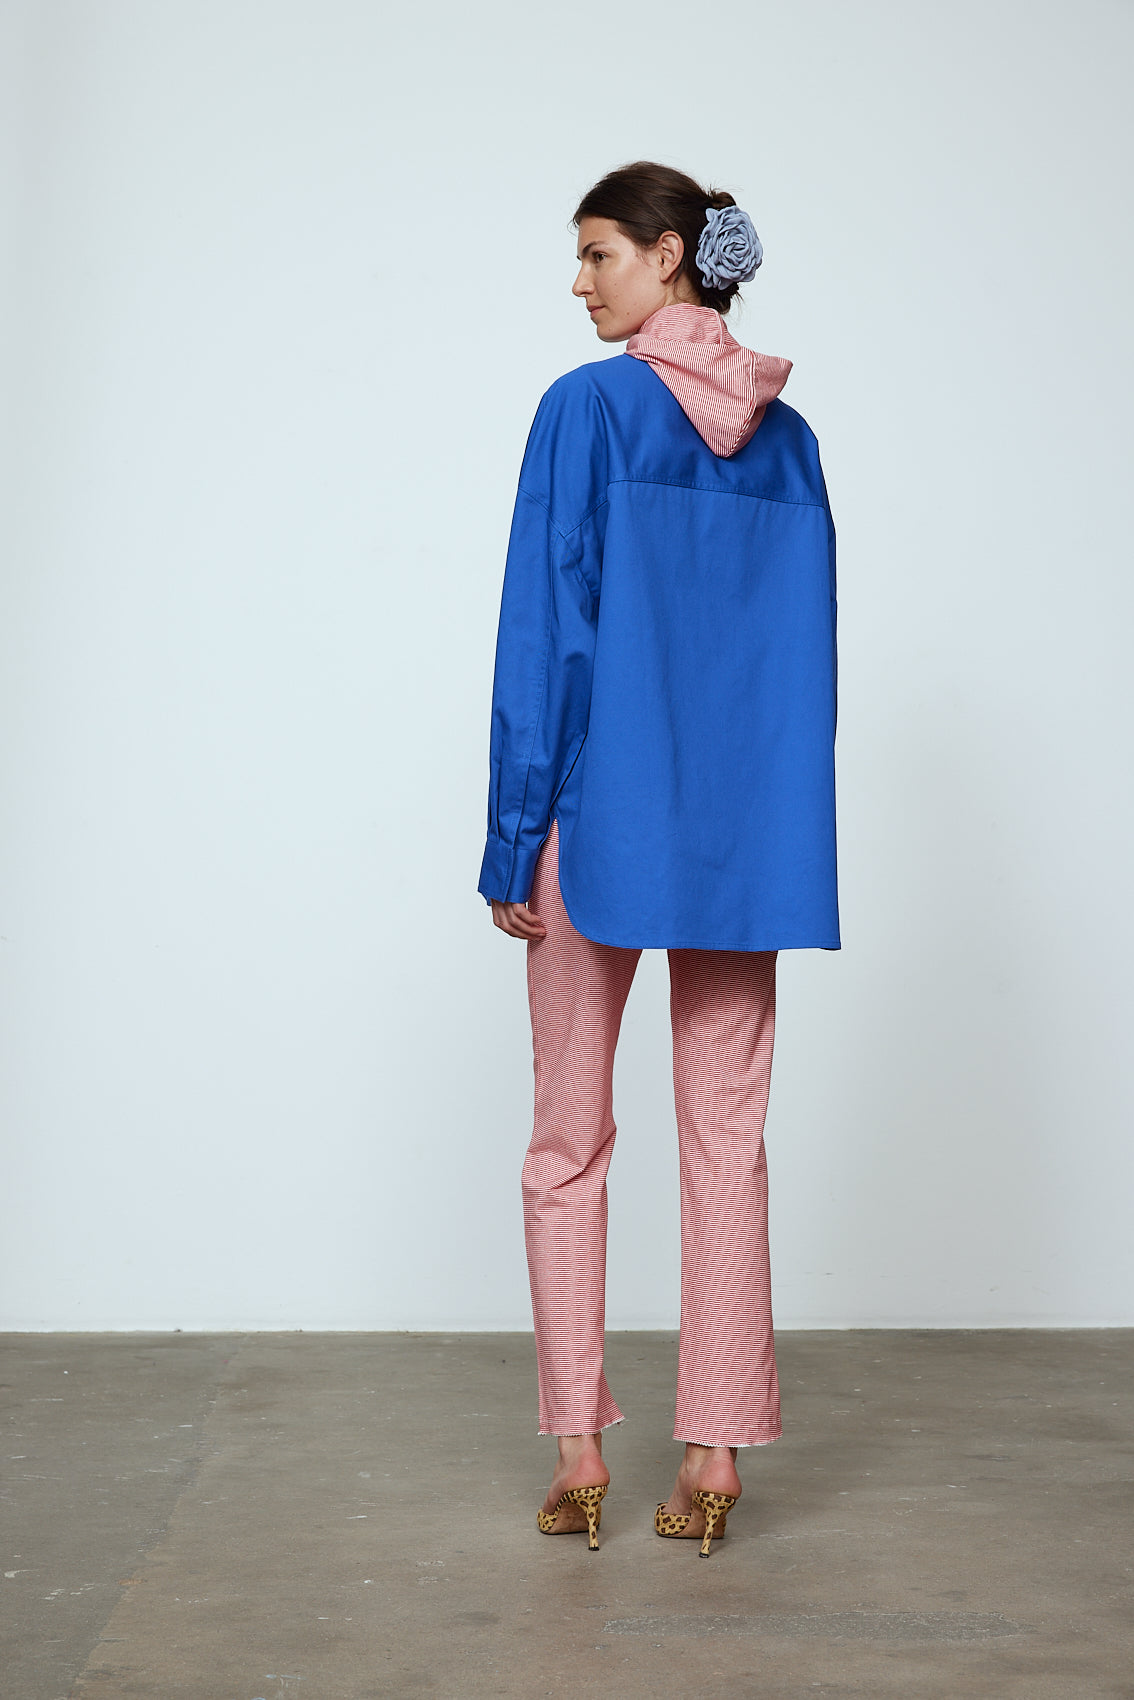 The Frederik Shirt is an oversized cotton style with big sleeves and an embroidered Caro logo on the front.  Style it open over a dress, tank top, or t-shirt or buttoned up on its own.  Material: 100% cotton.  The model is 179cm (5'10") and wears size S. Inspired by Frederik Bille Brahe.